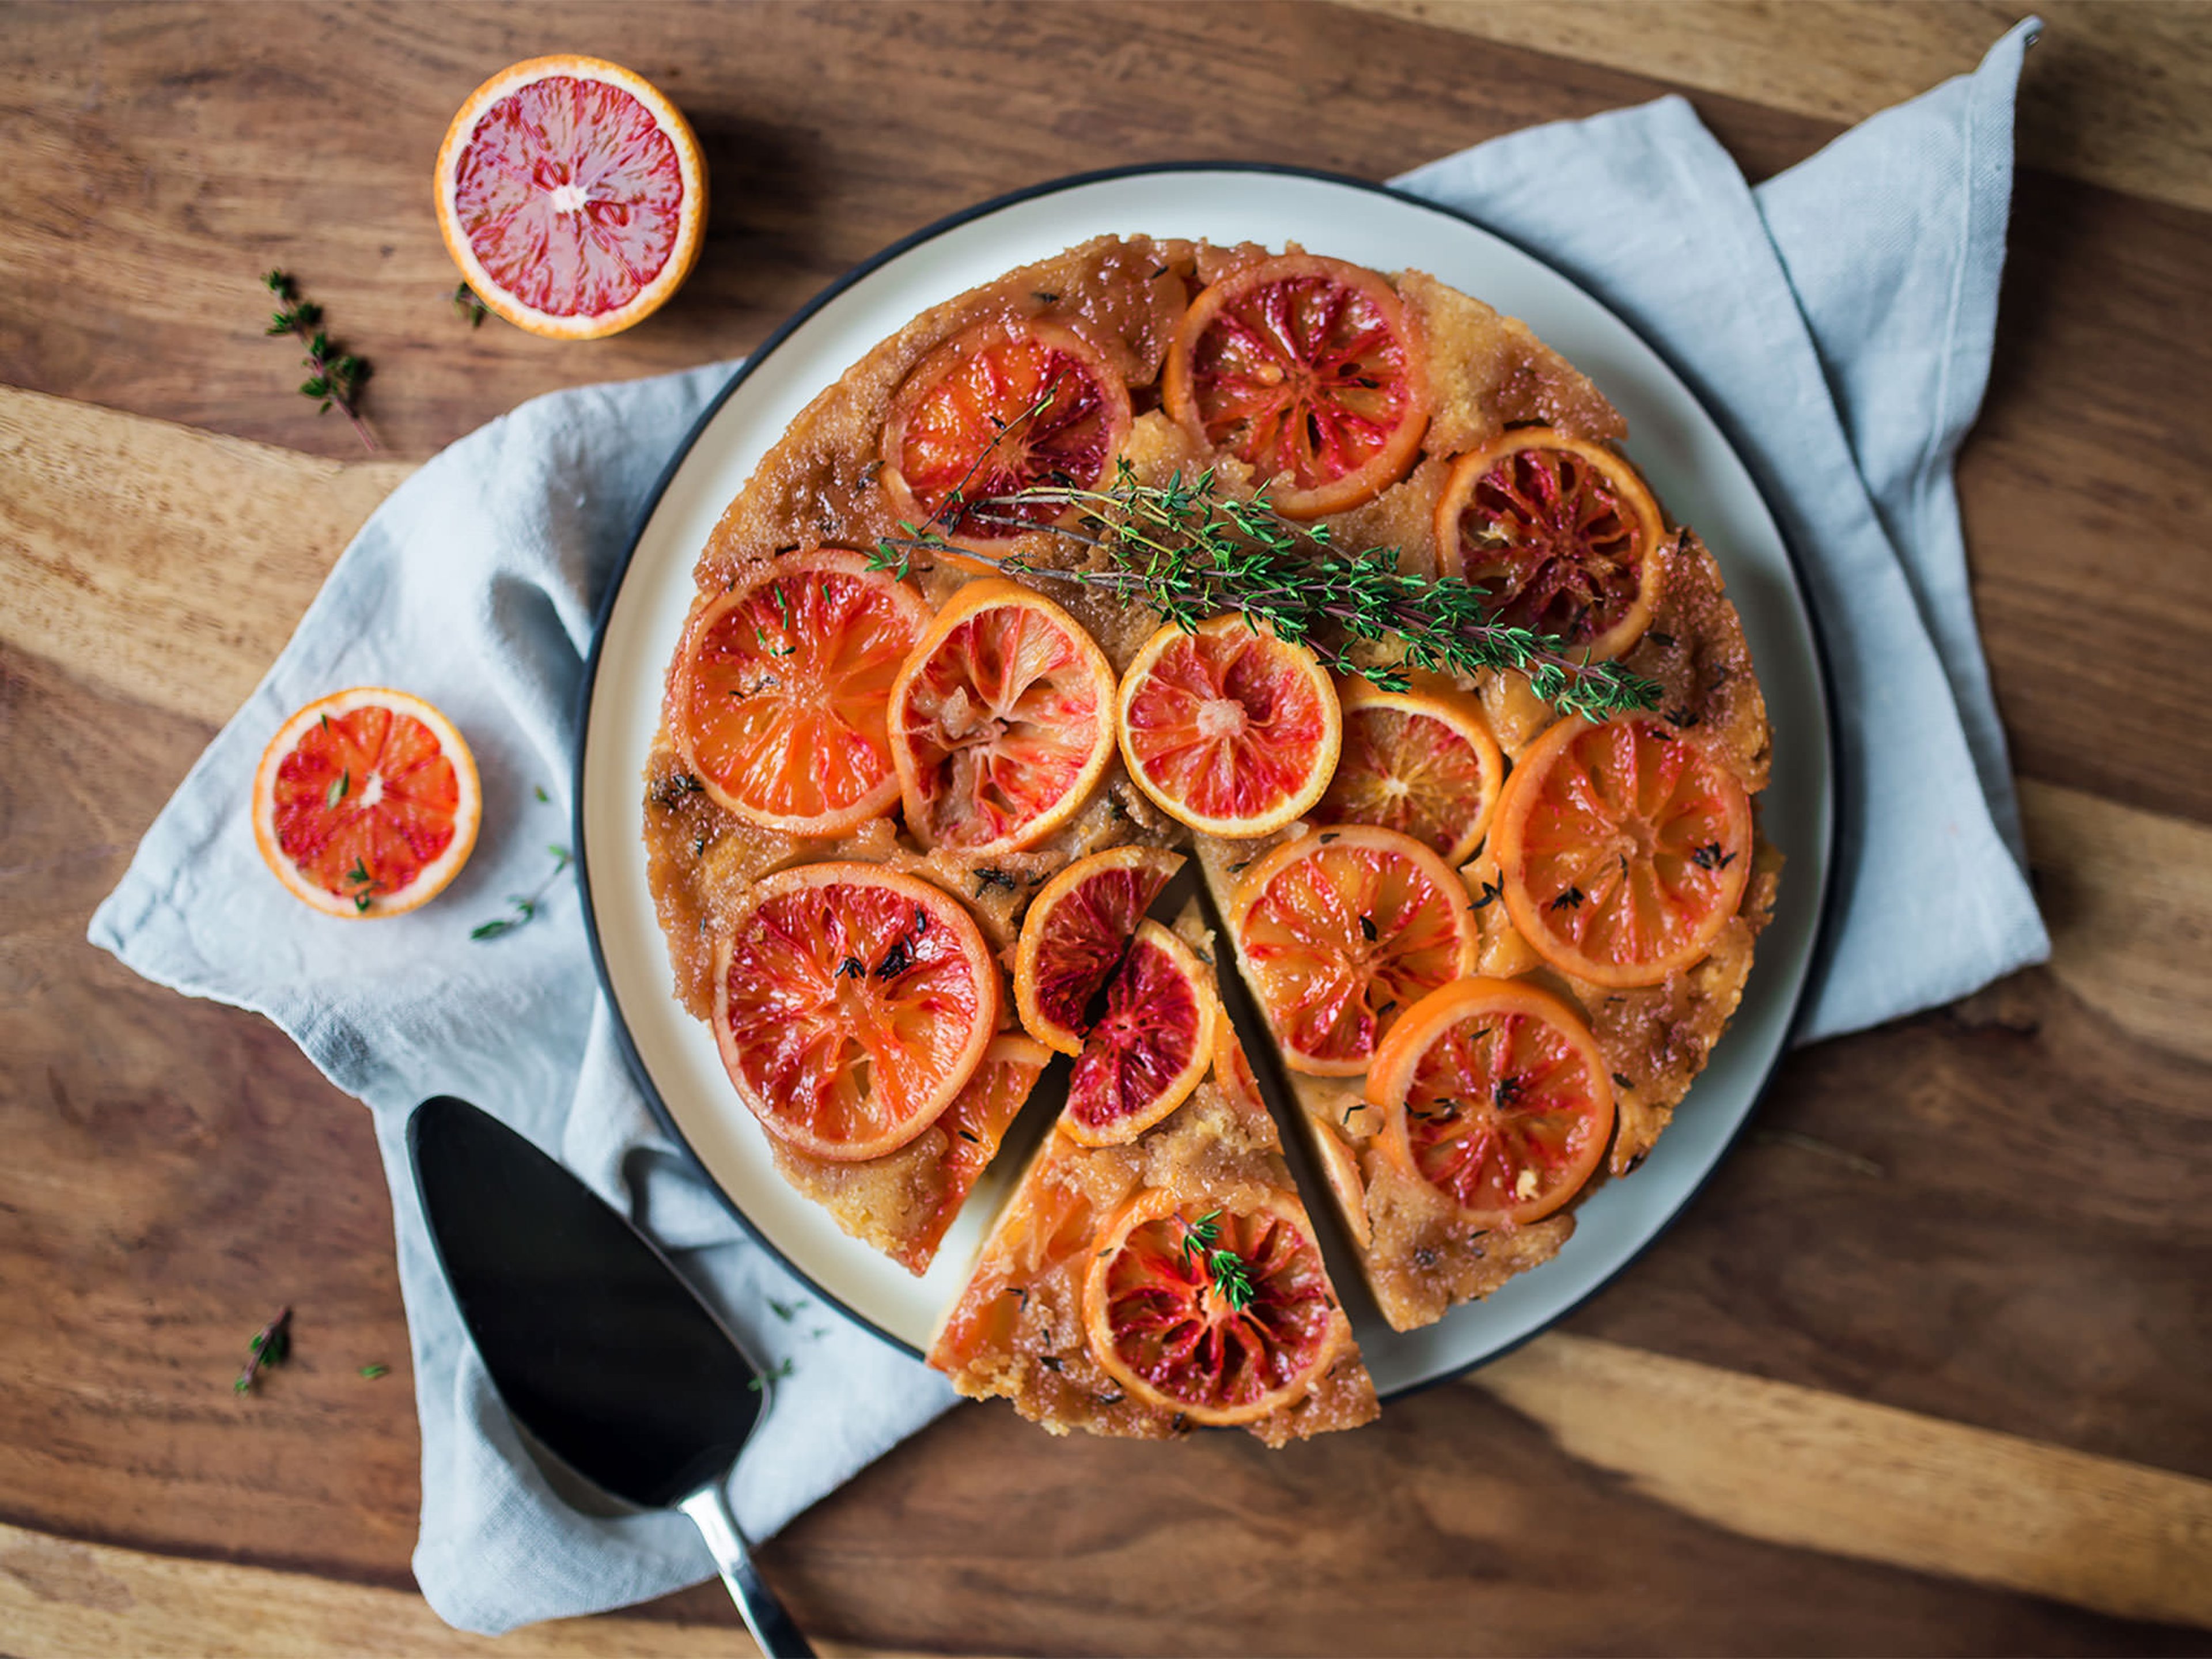 Blood orange upside-down cake with thyme